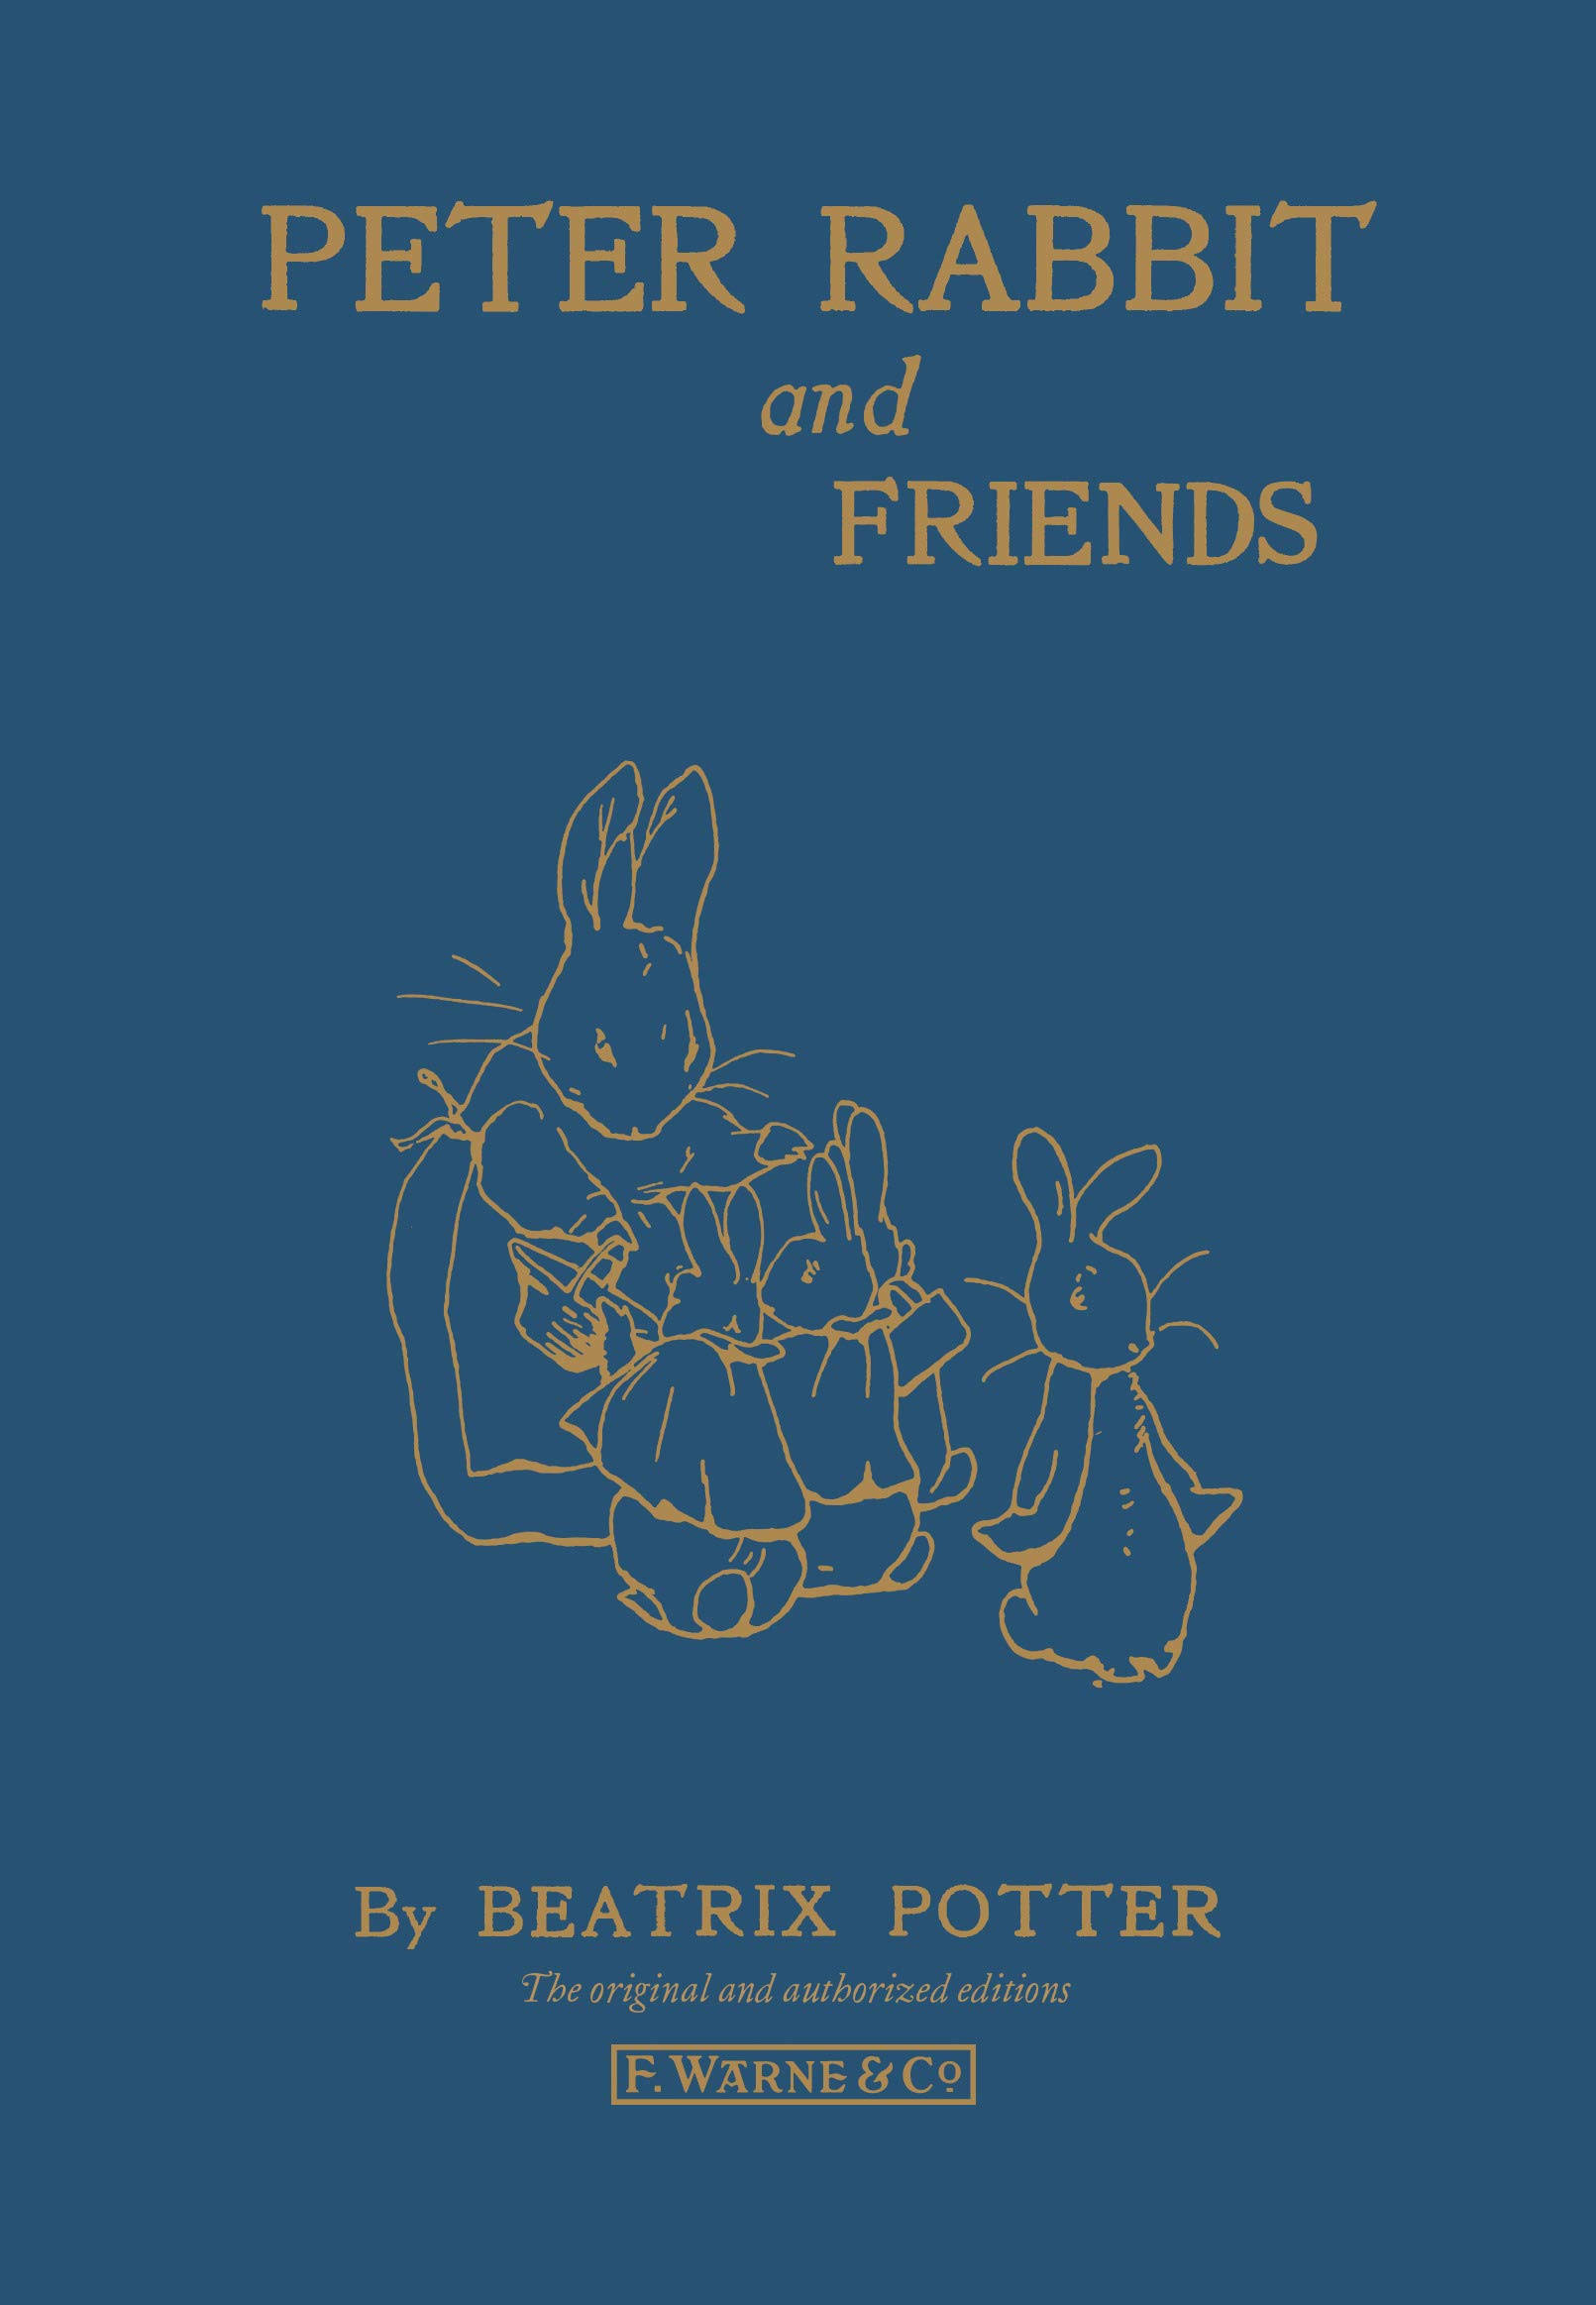 Peter Rabbit and Friends [Book]